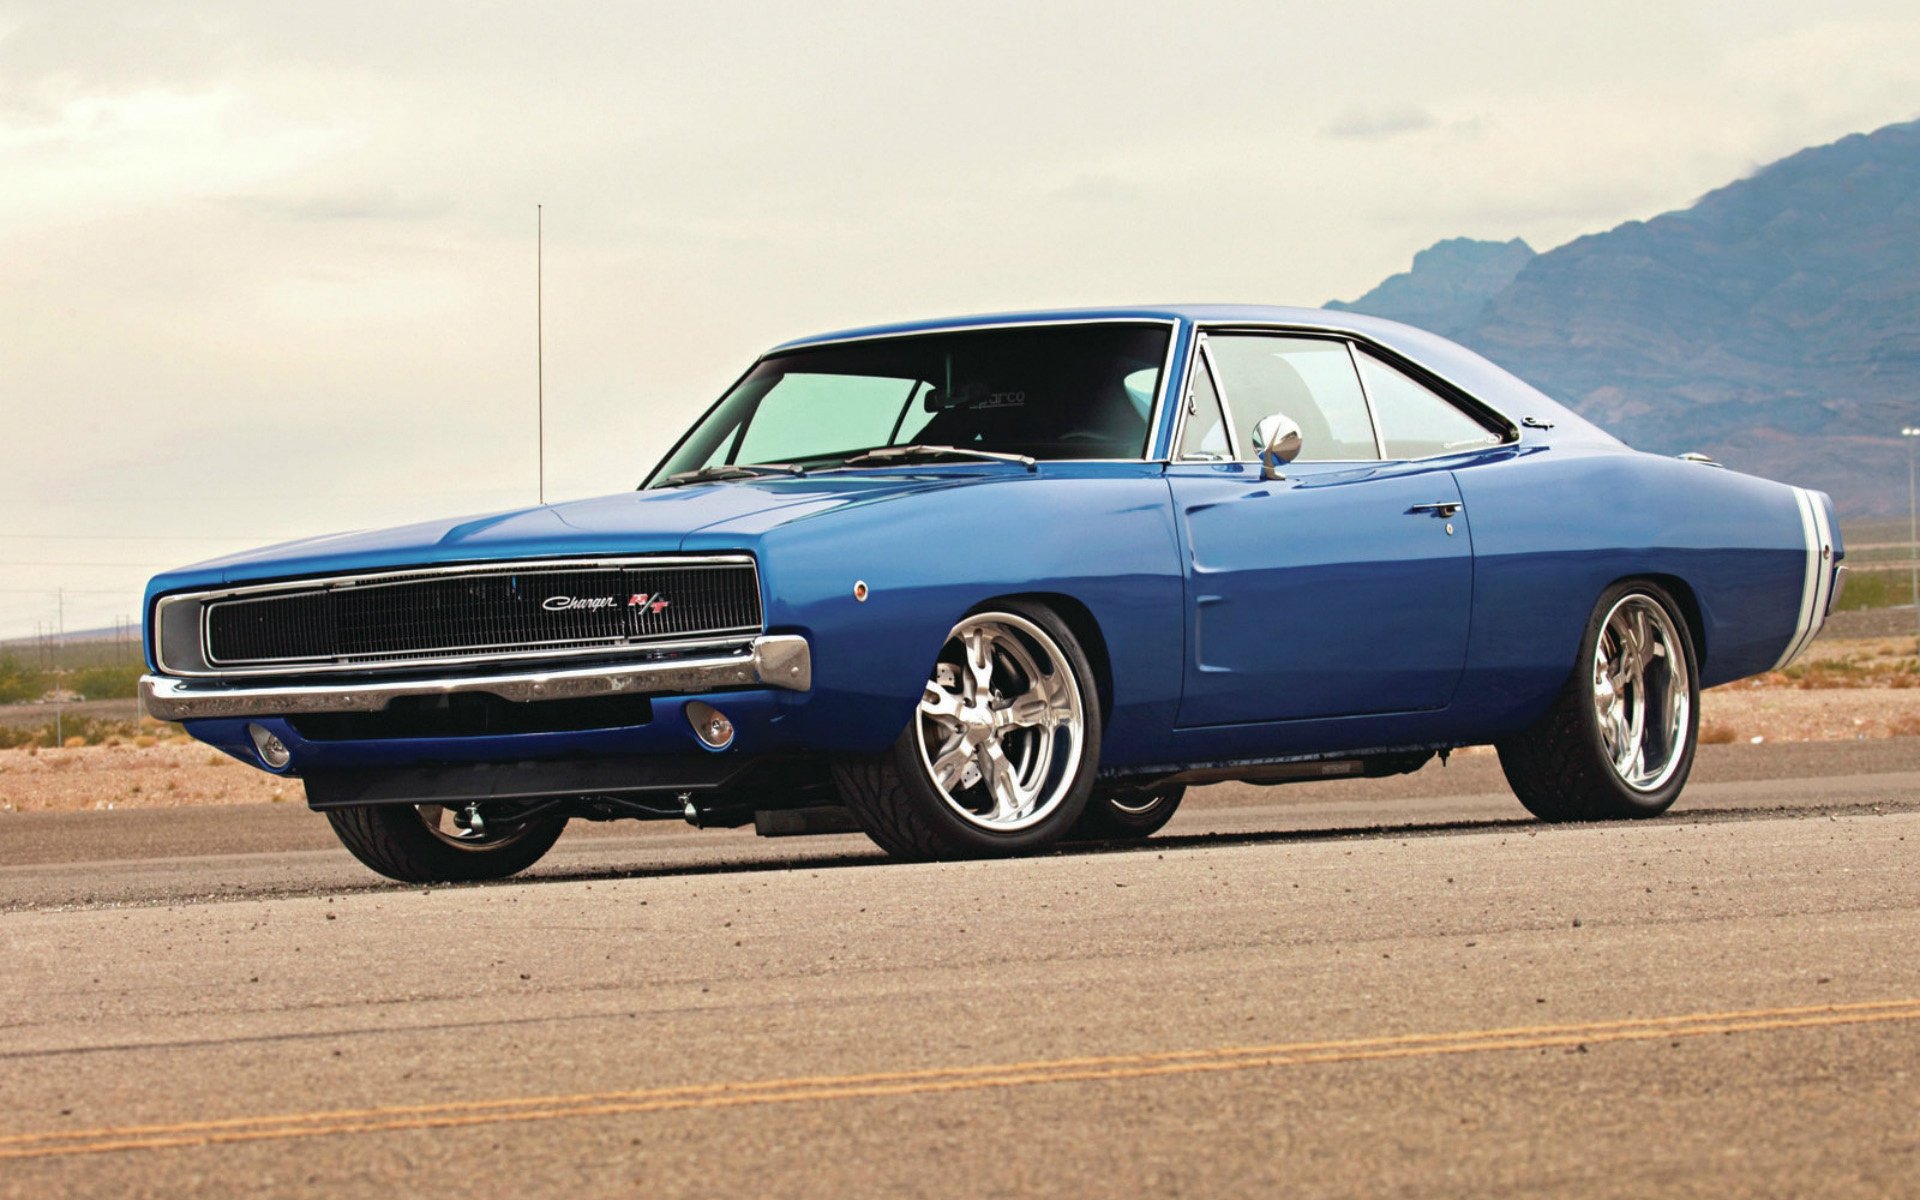 Free download 1968 Dodge Charger Rt HD Wallpaper Background Image 1920x1200 [1920x1200] for your Desktop, Mobile & Tablet. Explore 1968 Dodge Charger Wallpaper Dodge Charger Wallpaper, 1968 Dodge Charger Wallpaper, 1968 Dodge Charger RT